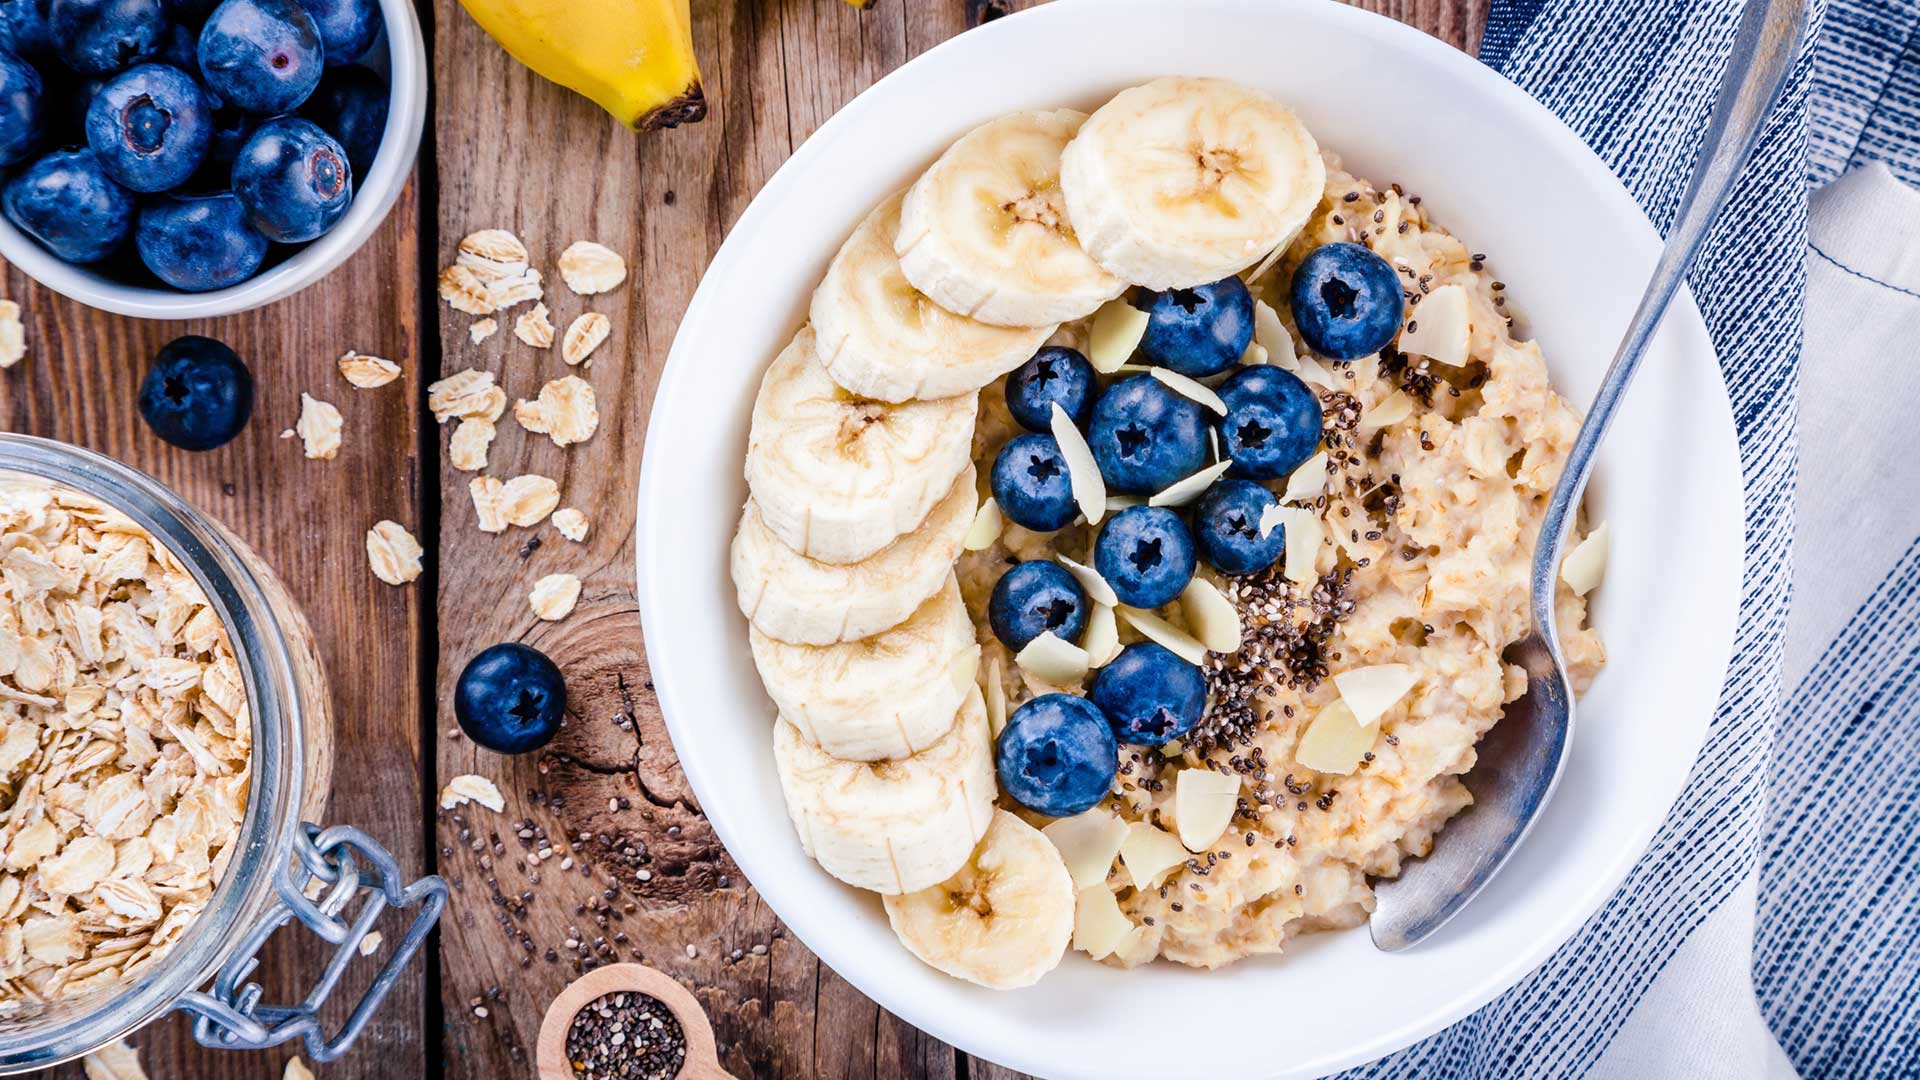 Breakfast: oatmeal with bananas, blueberries, chia seeds and almonds on a plate on wooden table